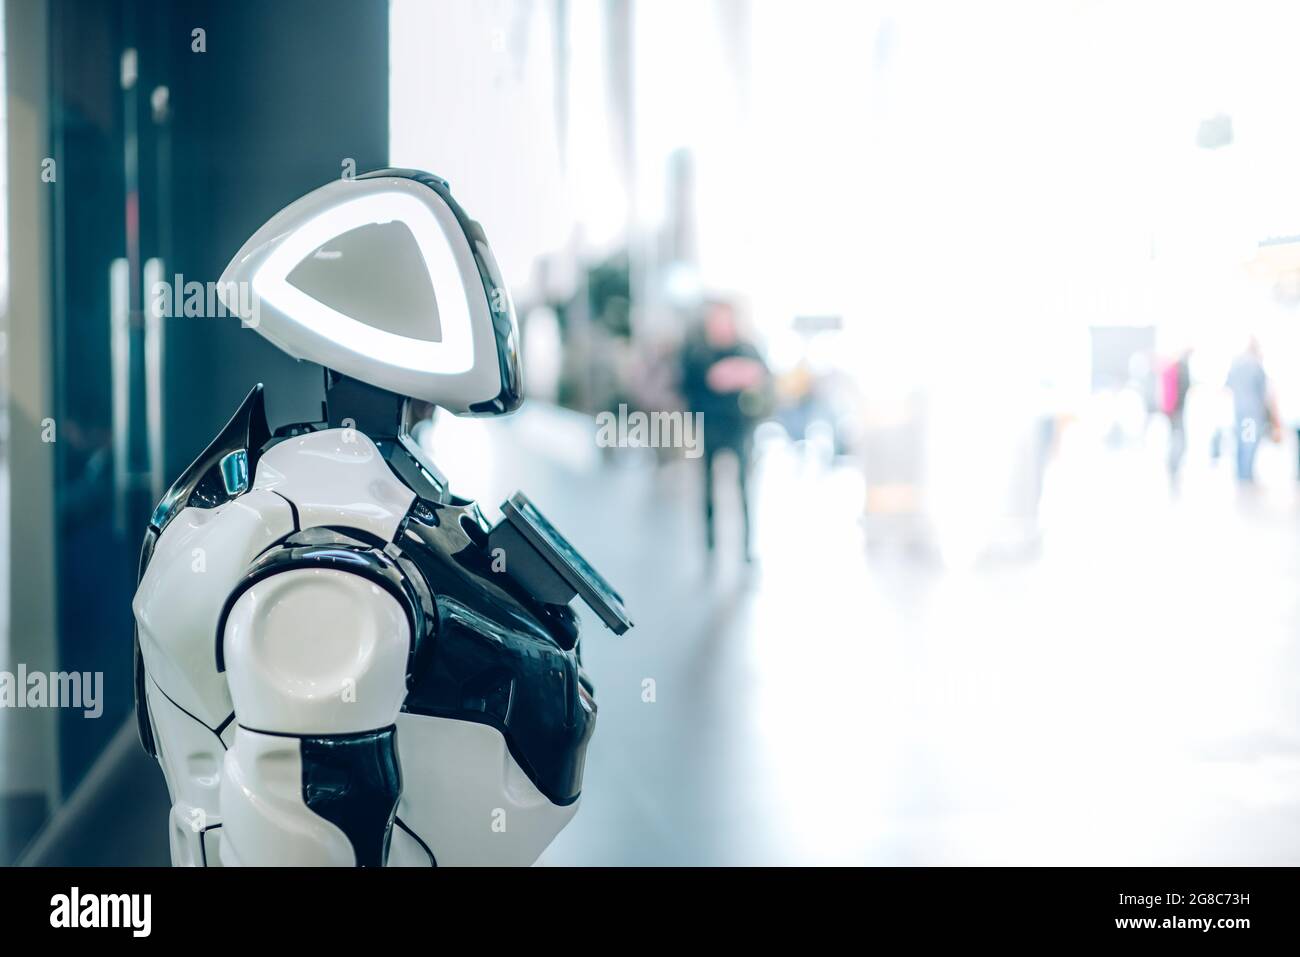 Technological progress of smart robot assistant with artificial intelligence in public place. Futuristic concept of robotics, machines in daily life Stock Photo